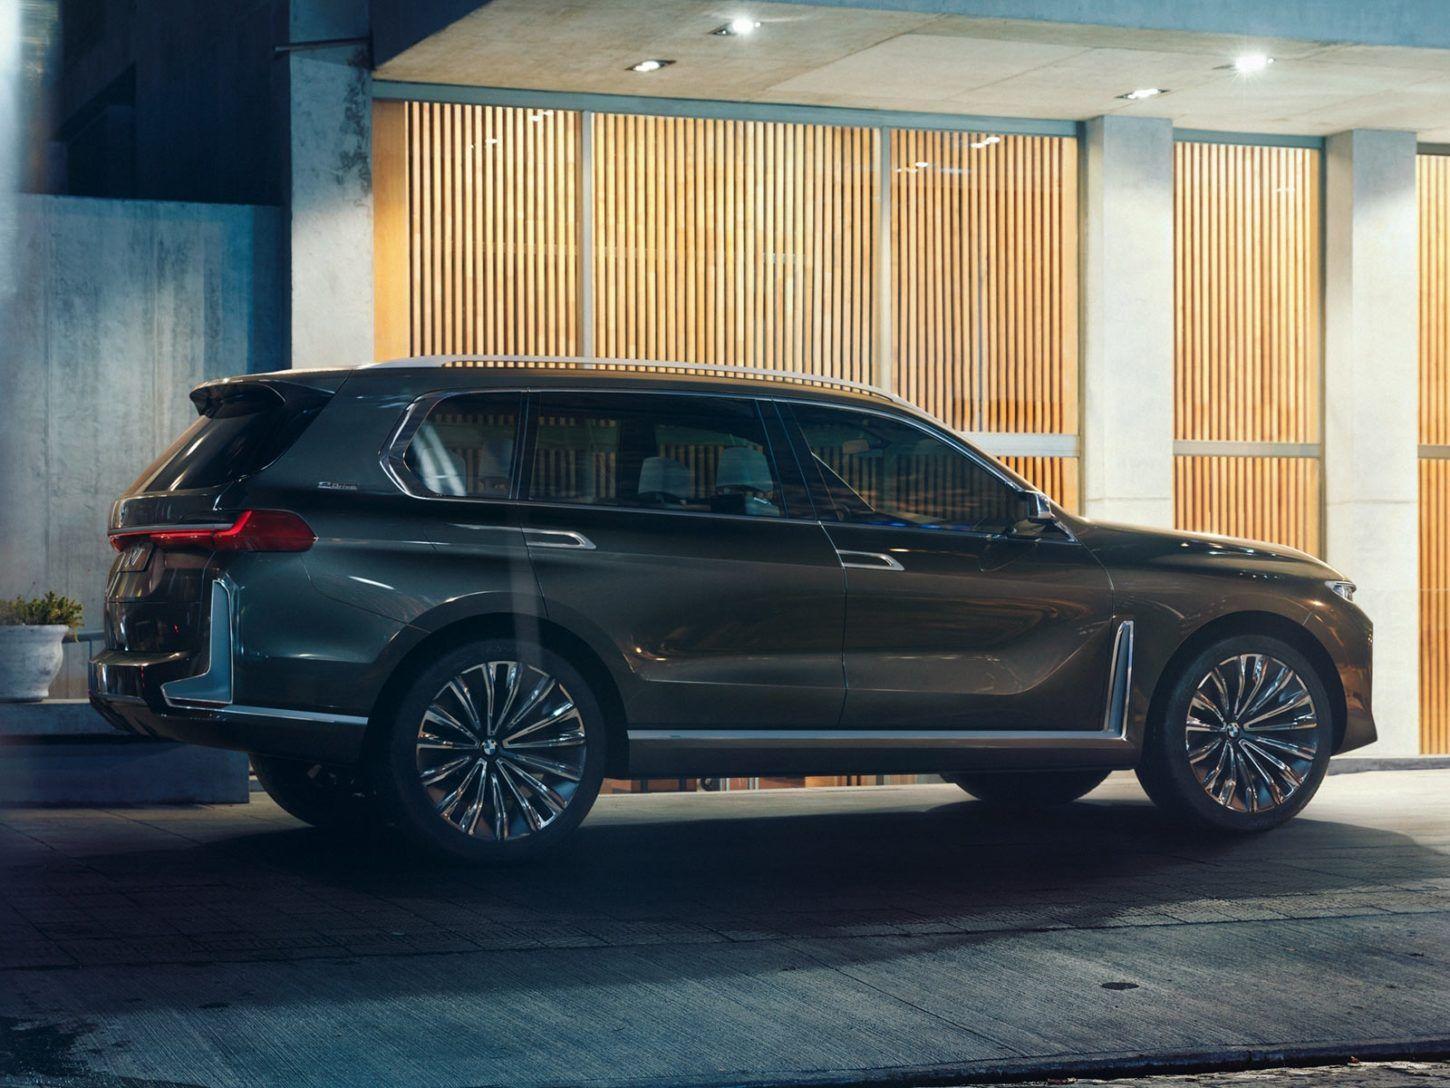 BMW X7. New Design Wallpaper. Car Preview and Rumors